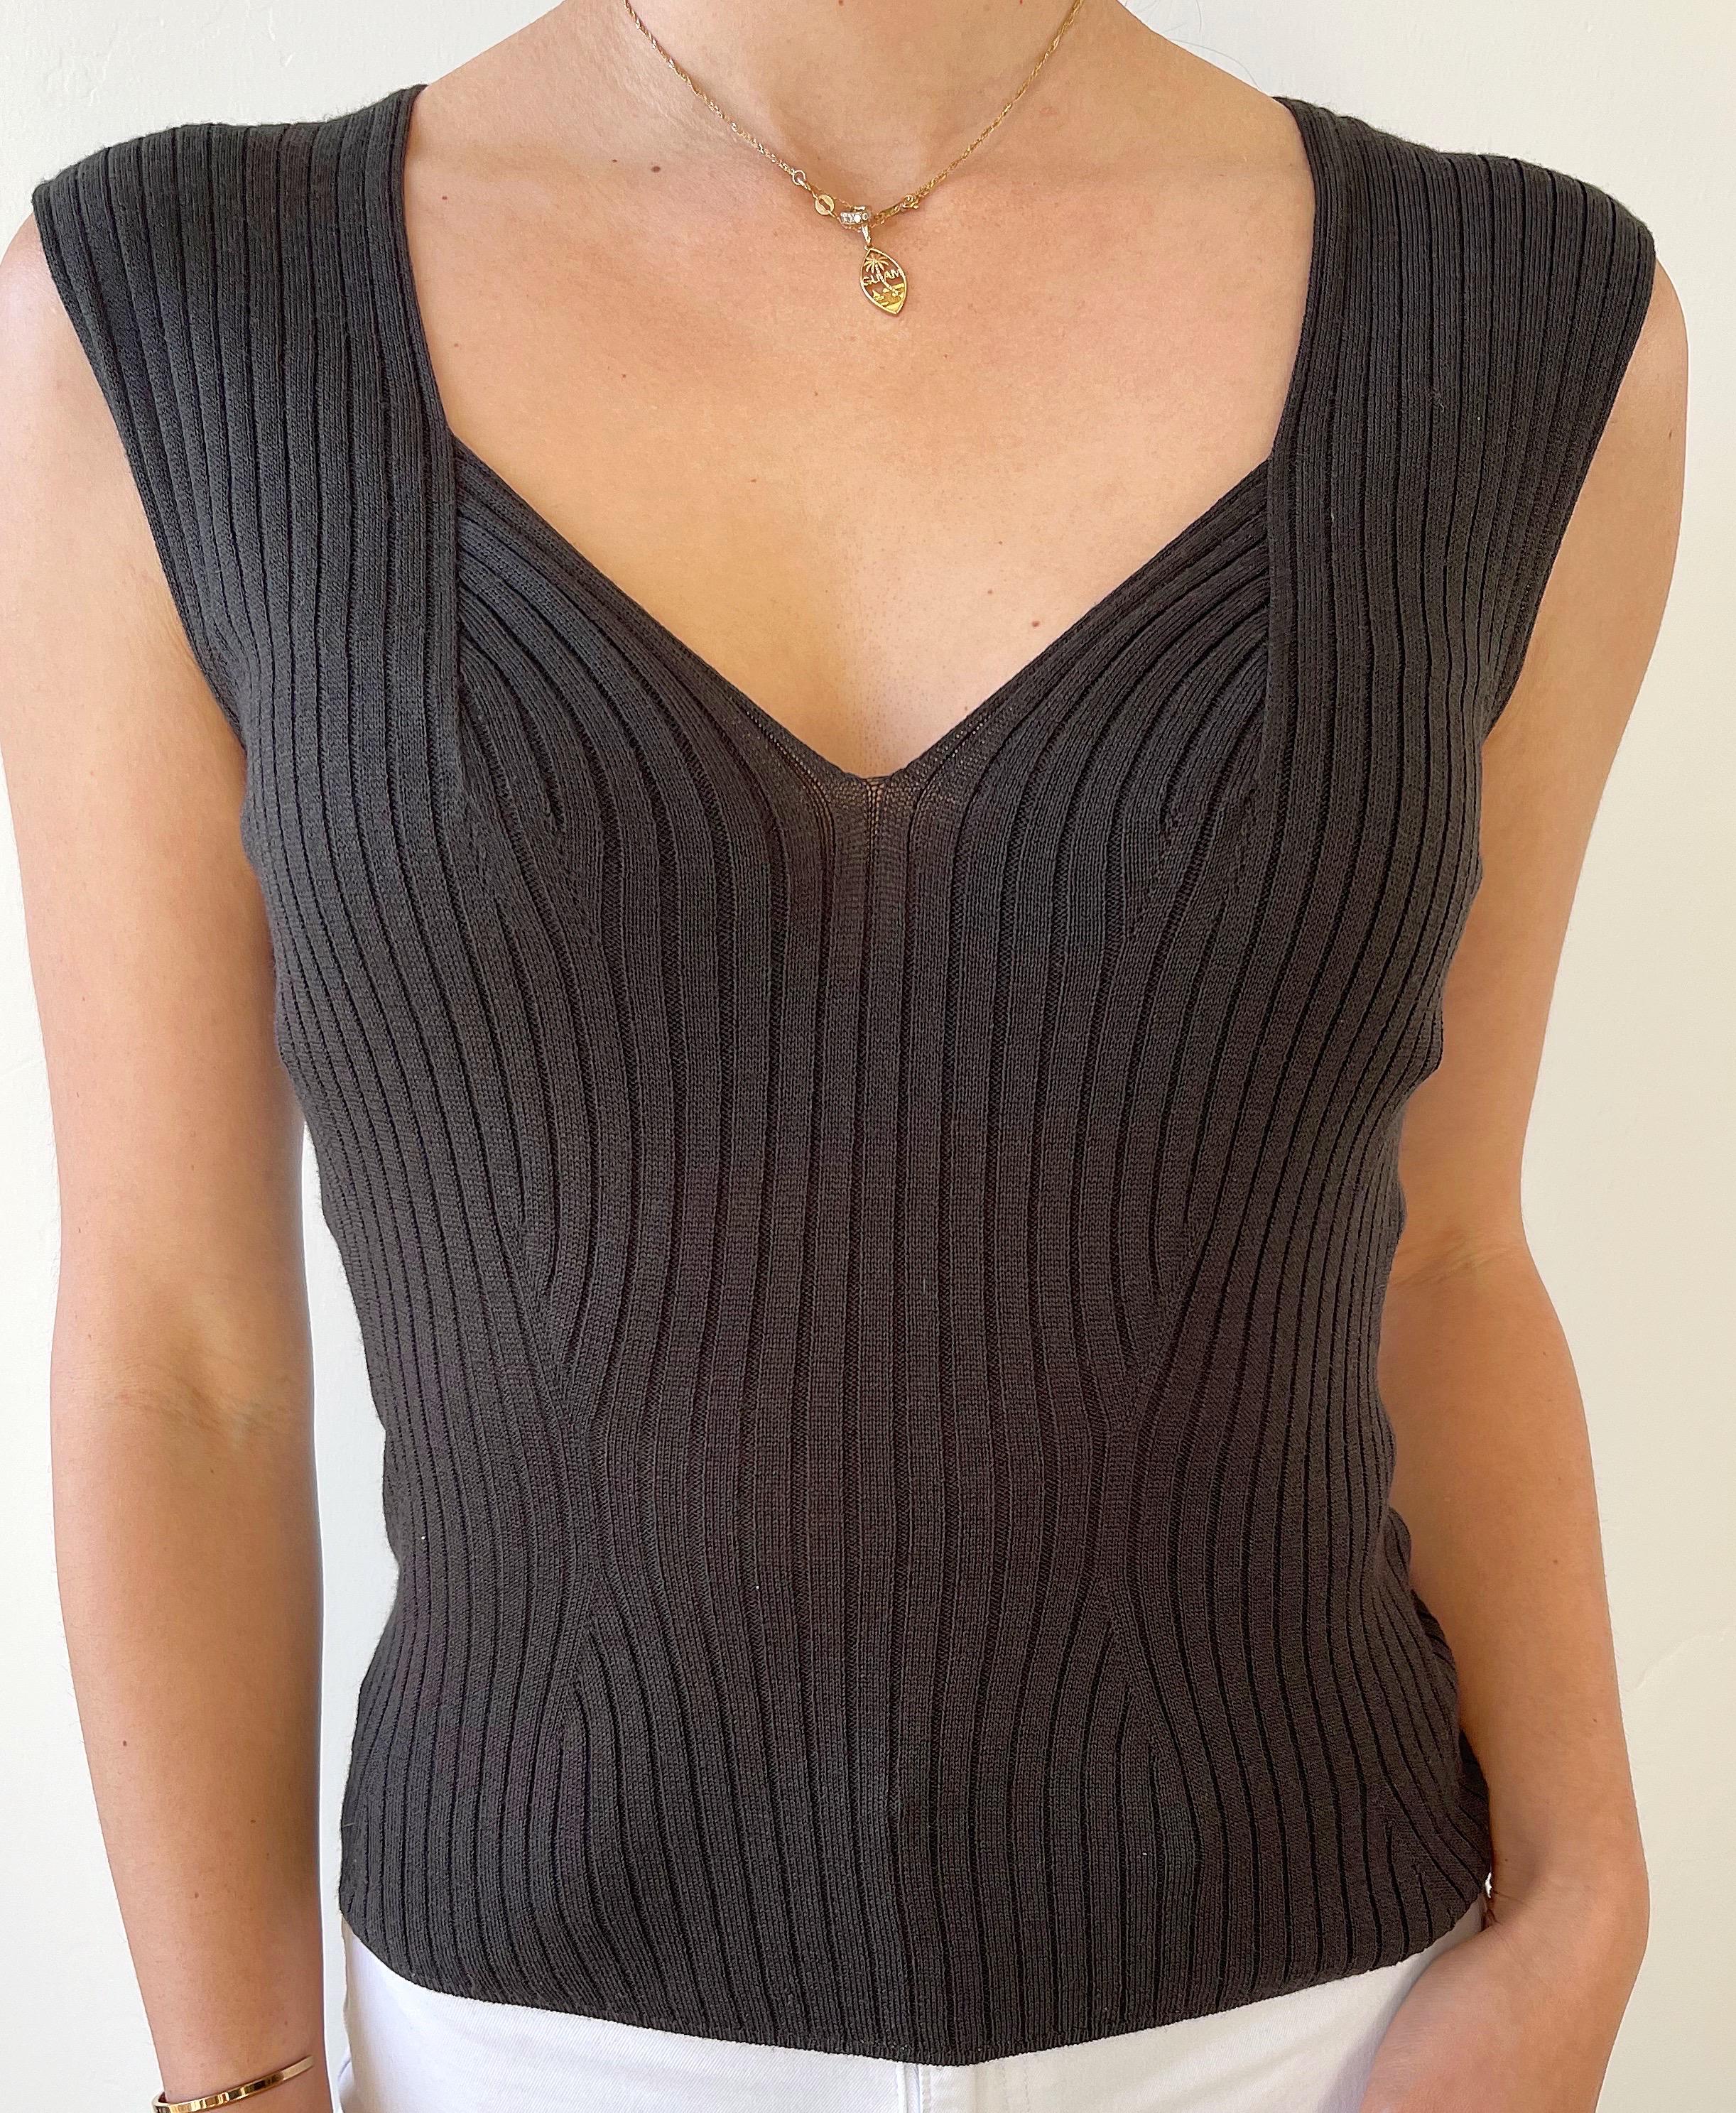 Yves Saint Laurent by Tom Ford Spring 2003 Brown Ribbed Sleeveless Vintage Top For Sale 6